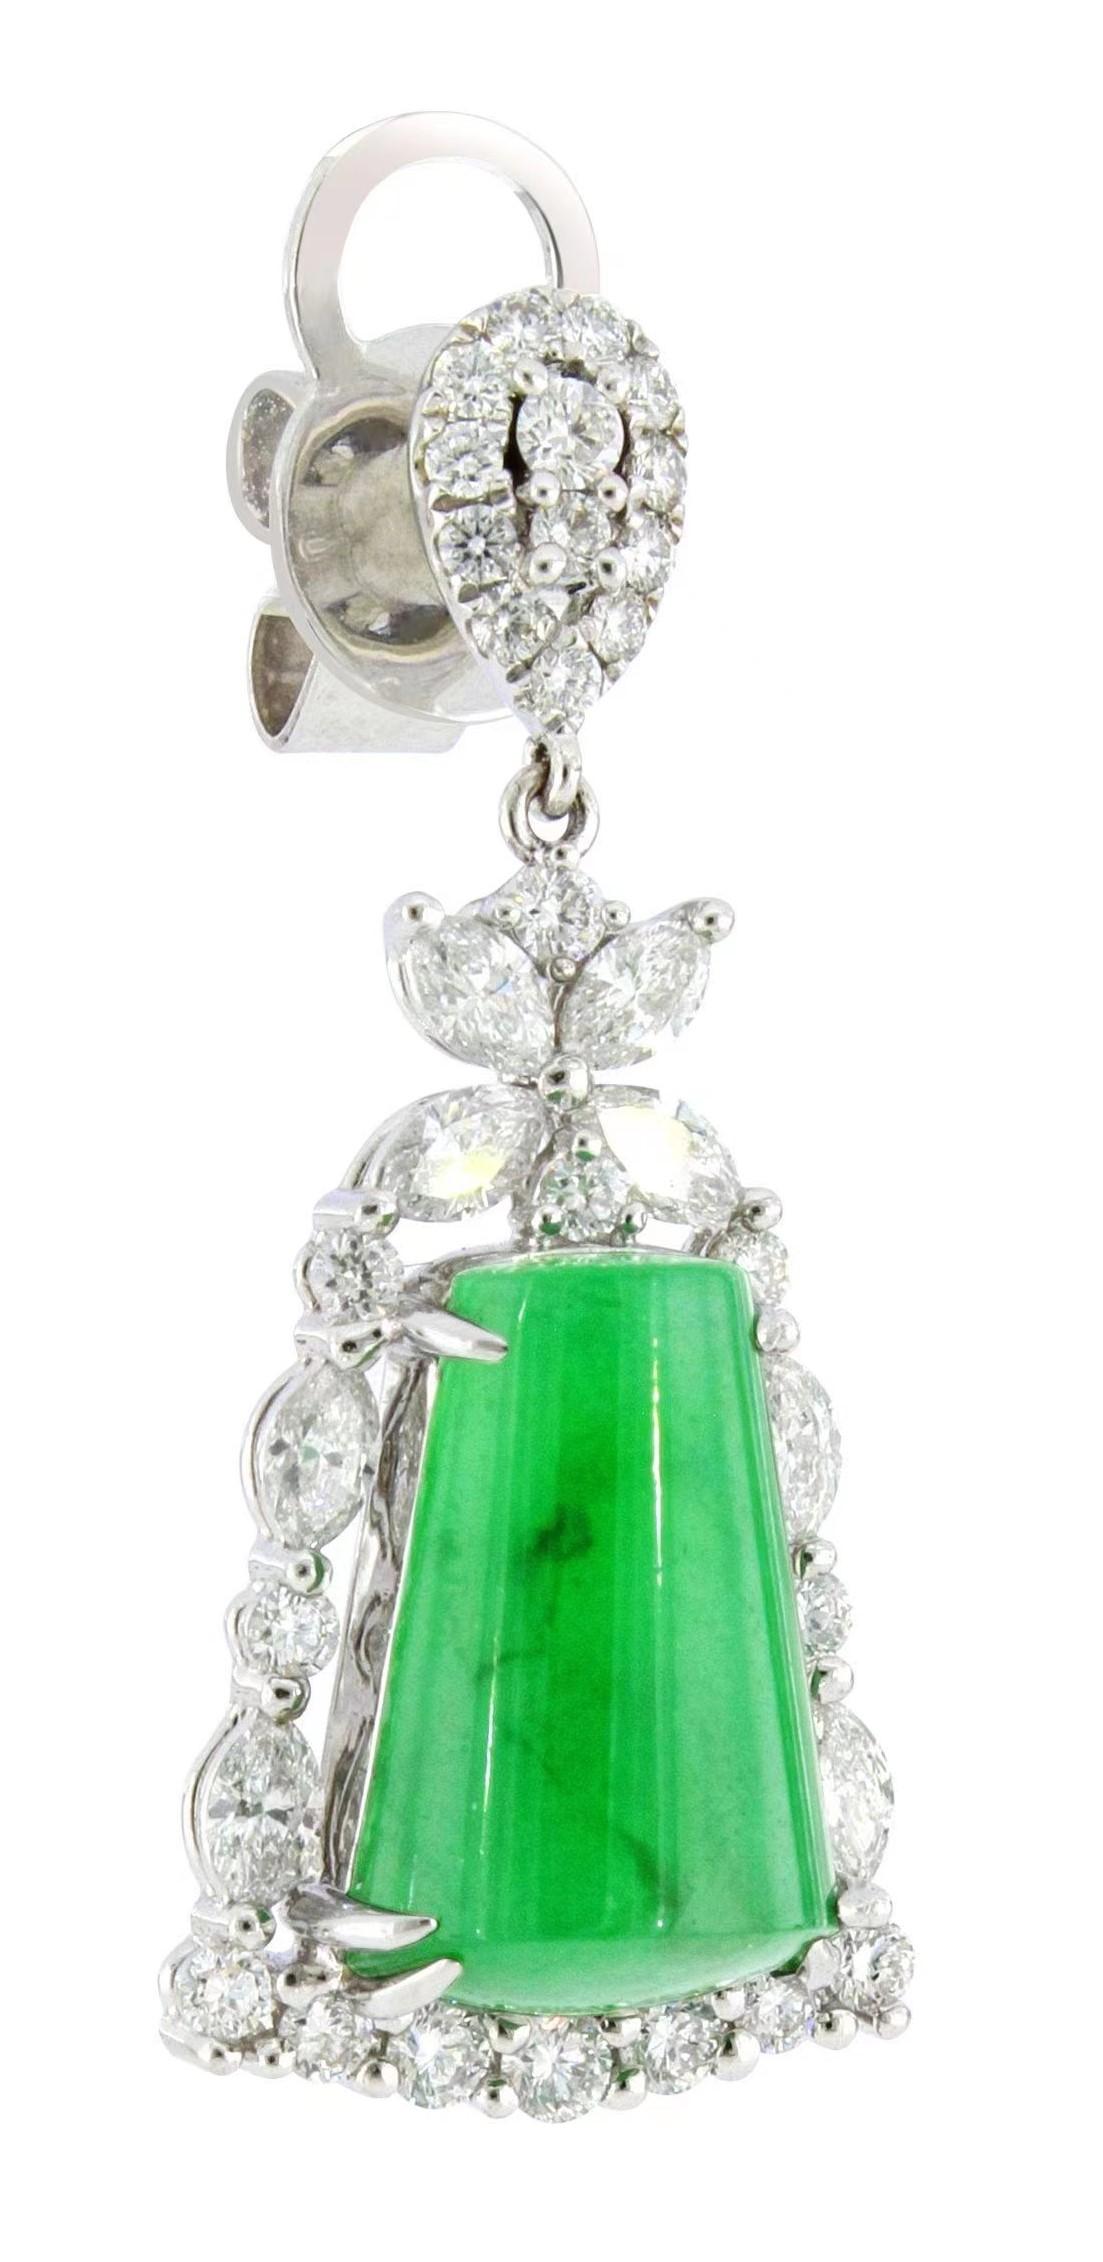 Brilliant Cut A Pair of Imperial Jadeite and Diamond Earrings in 18 Karat White Gold For Sale